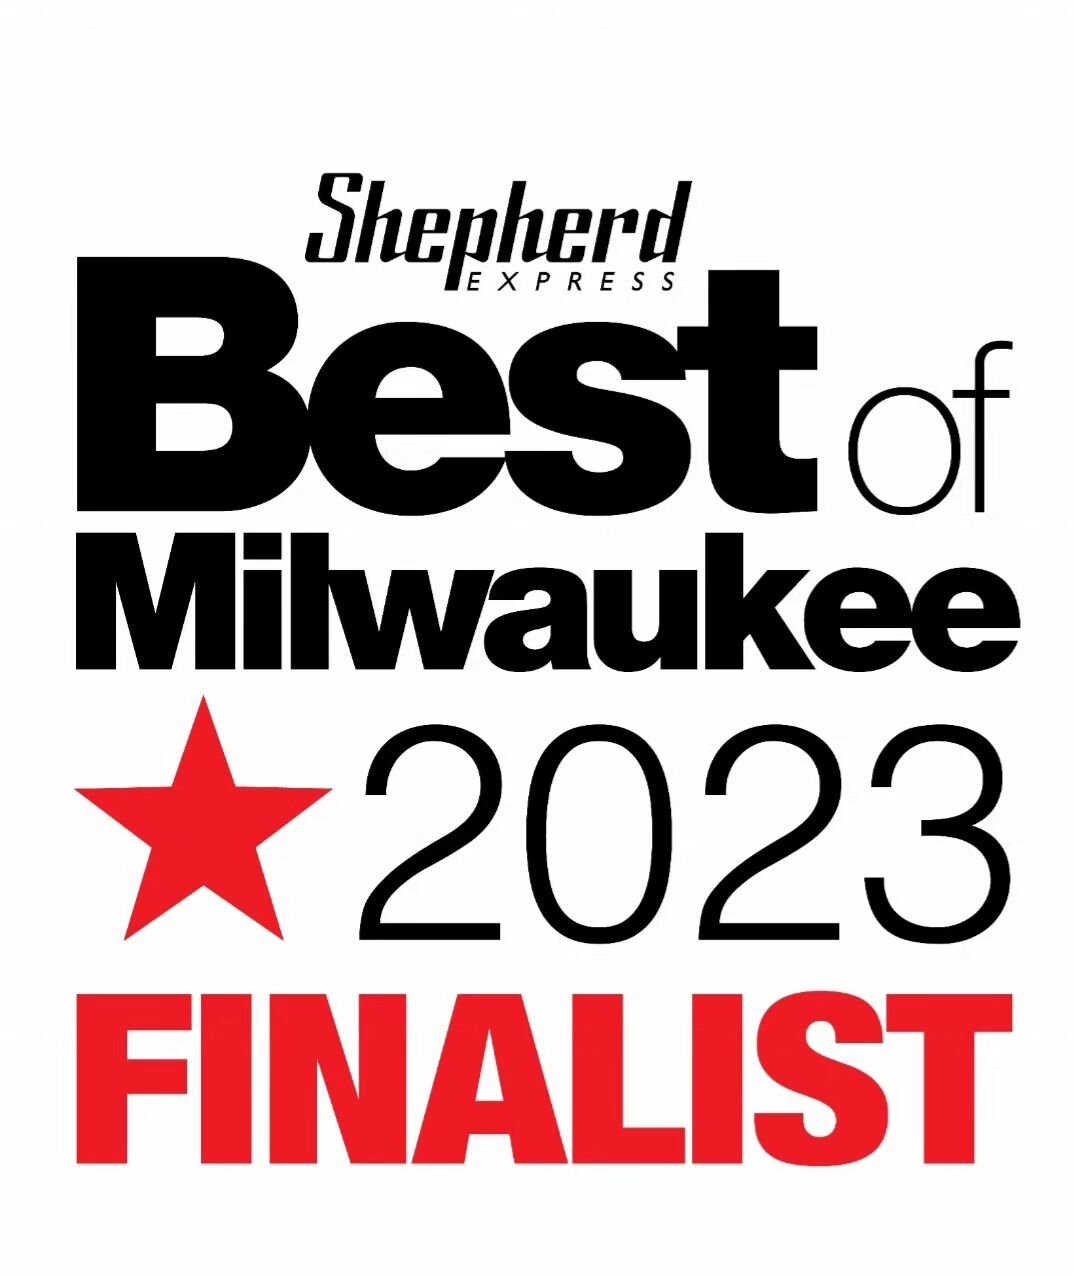 We are one of the finalist for the Best of Milwaukee, Shepherd Express. Please Vote for Studio Nails!

Here's the link to go vote at Shepherdexpress.secondstreetapp.com 
 Voting is November 2-30!